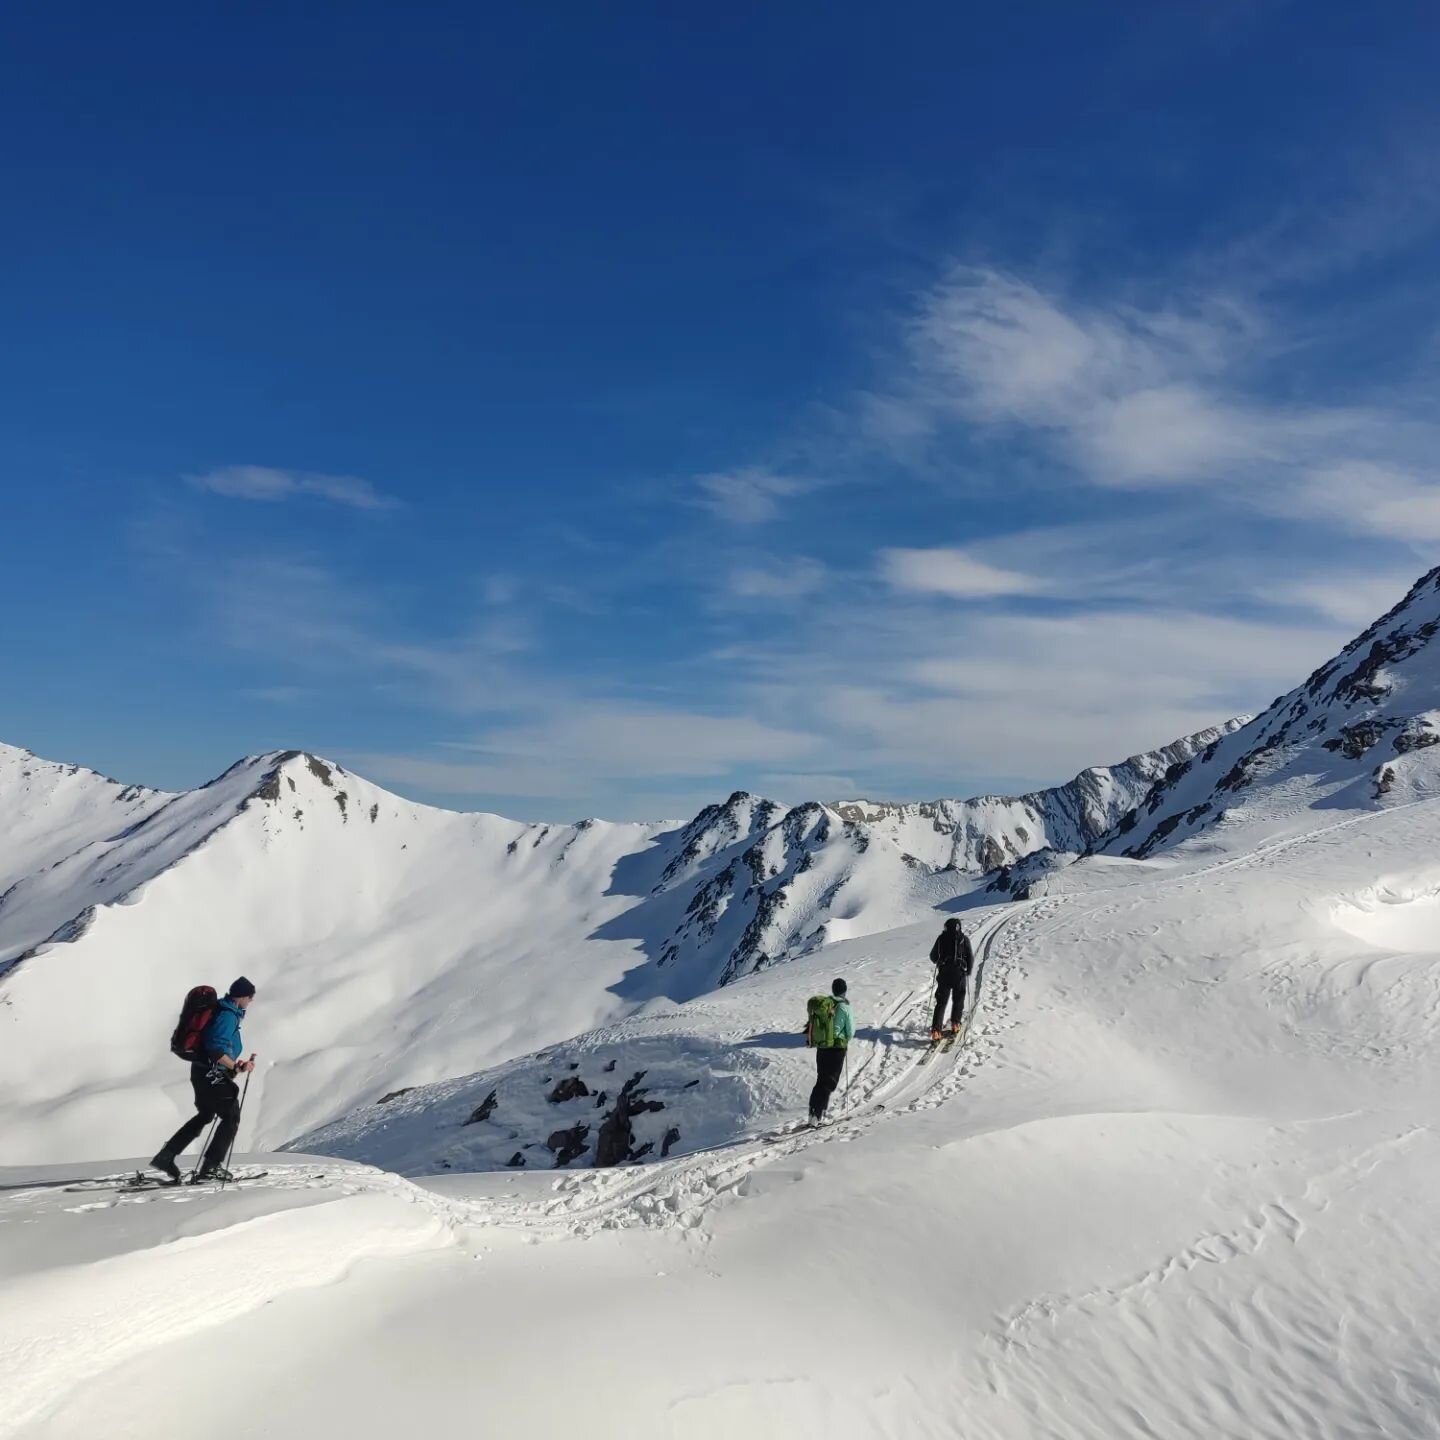 The Queyras. A wild spot and a lot quieter than the northern Alps. They've also had more snow than the Mont Blanc Massif this season. Despite it being over a week since the last snowfall we managed to find and ski some great snow every day on a trave